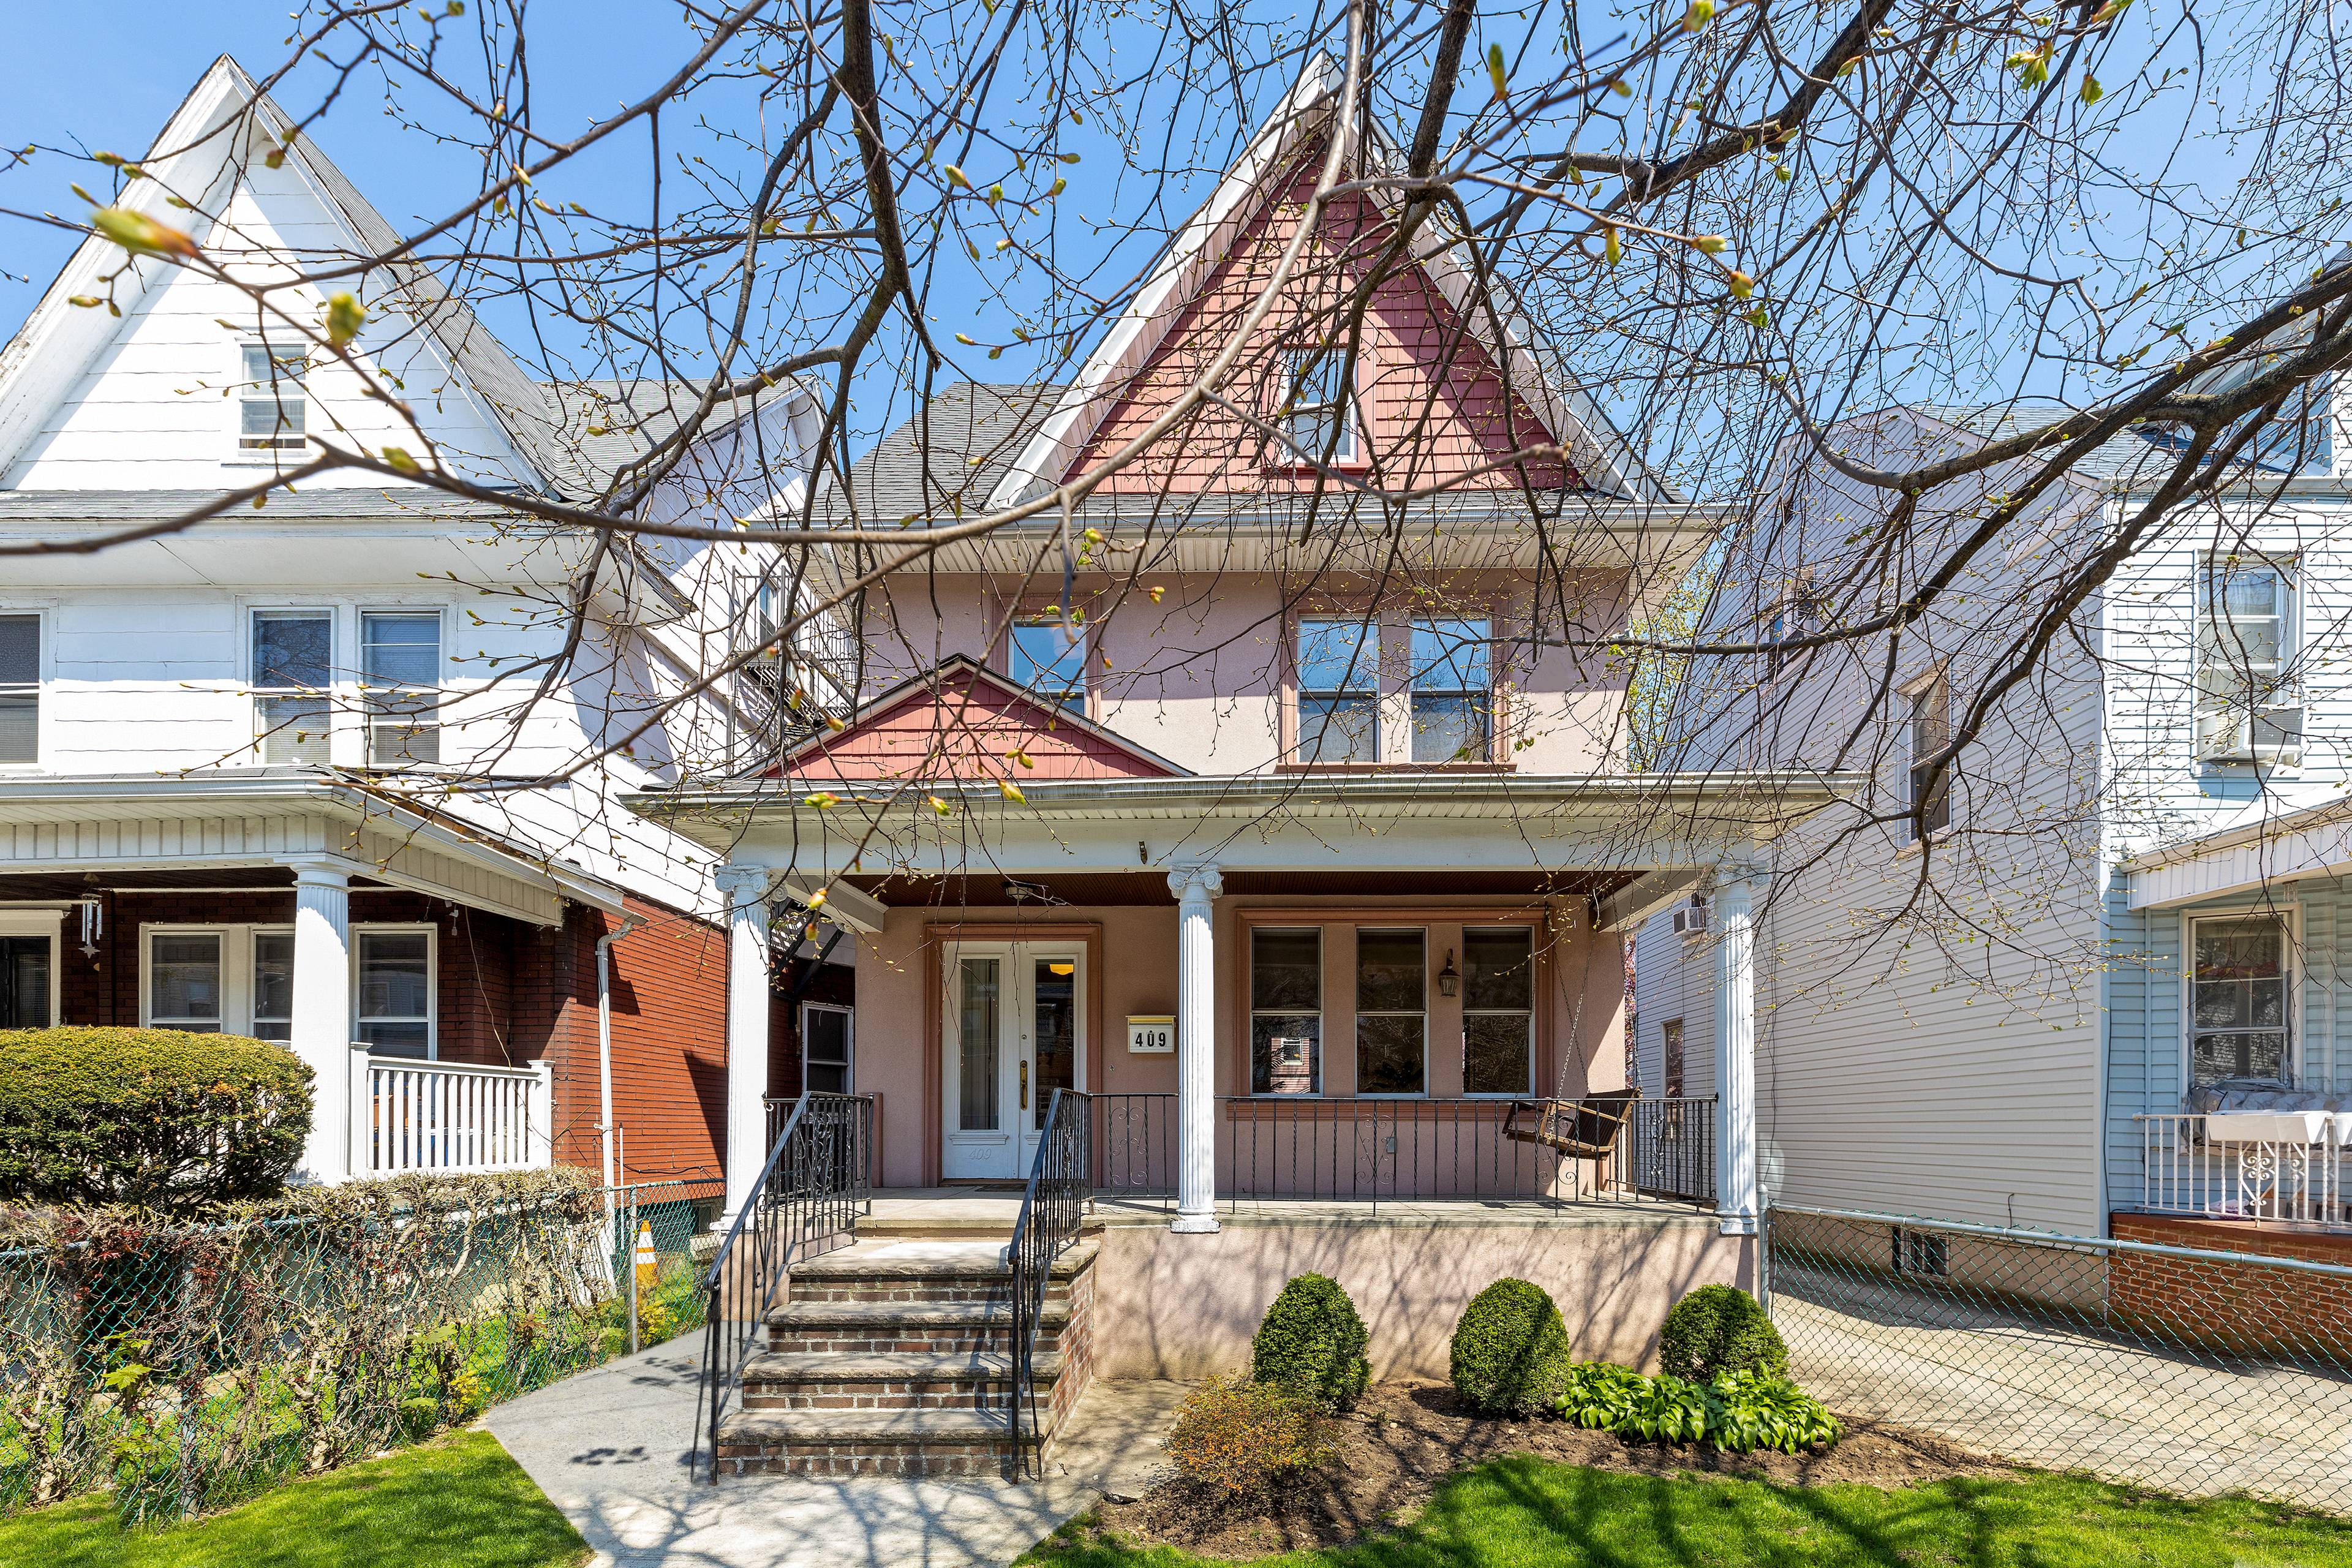 Kensington Jewel. This lovely single family home is filled with light, space and beauty.